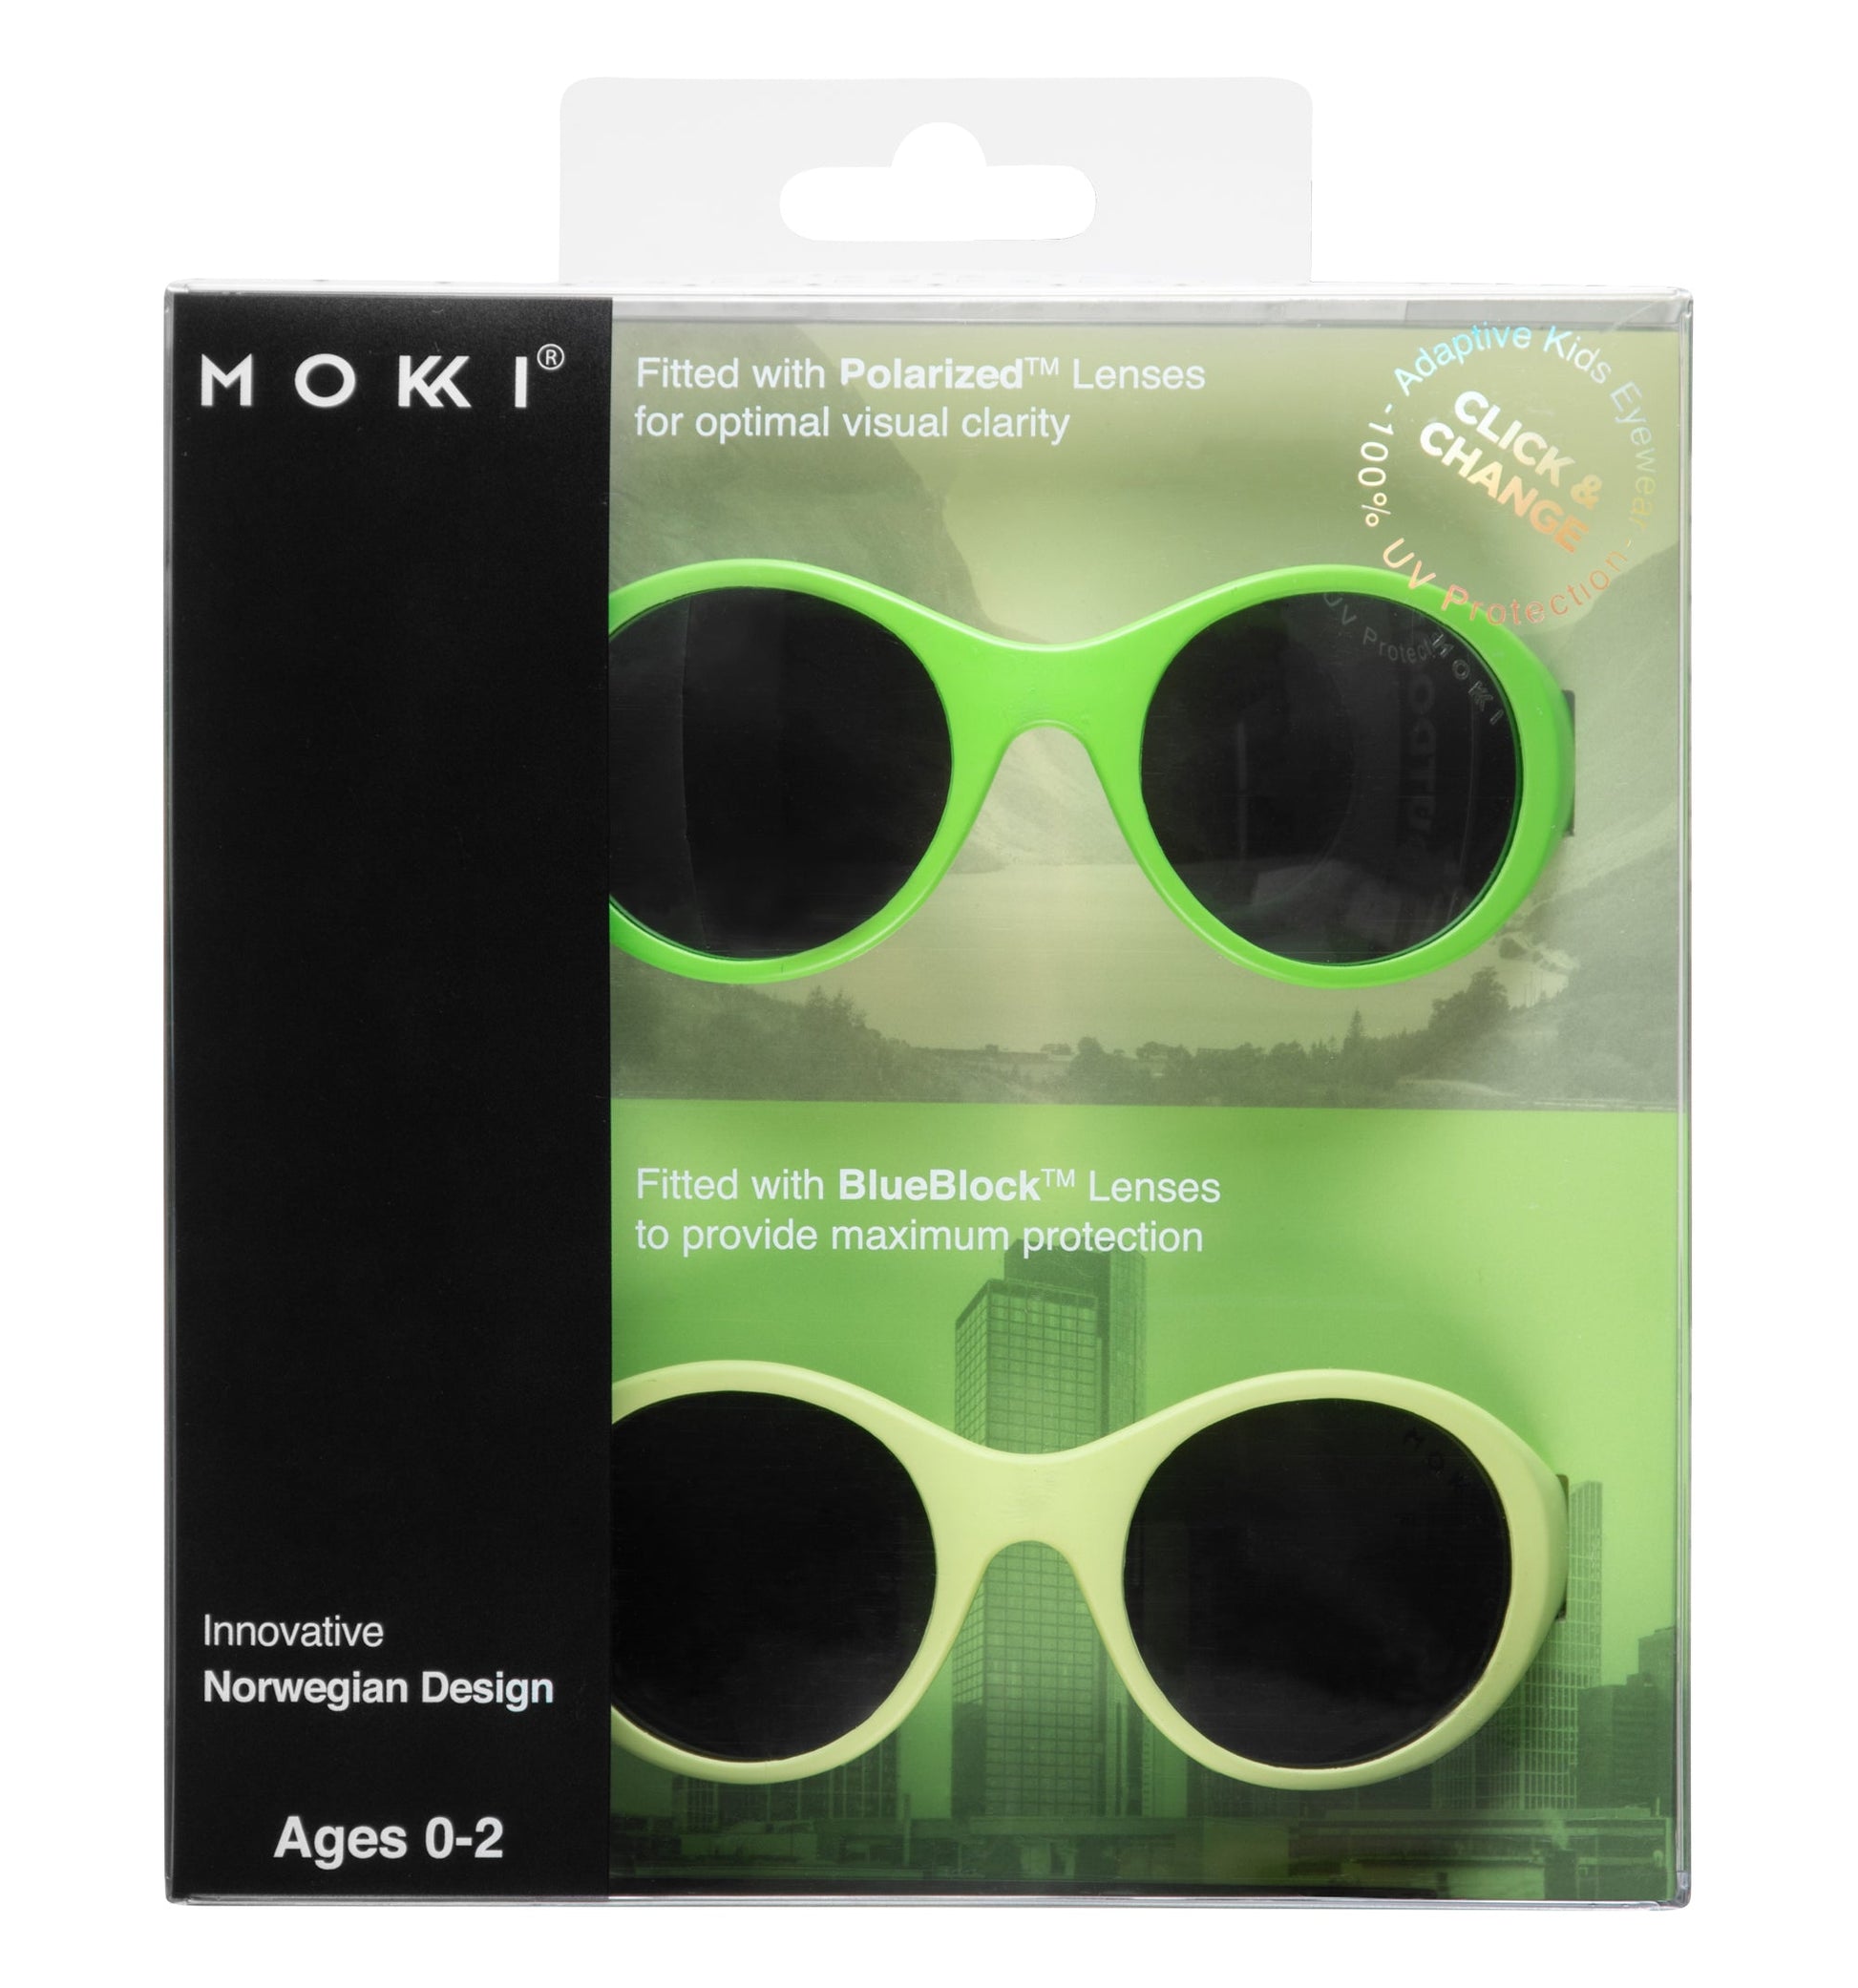 Mokki Click & Change-sunglasses for kids ages 0-2 in green